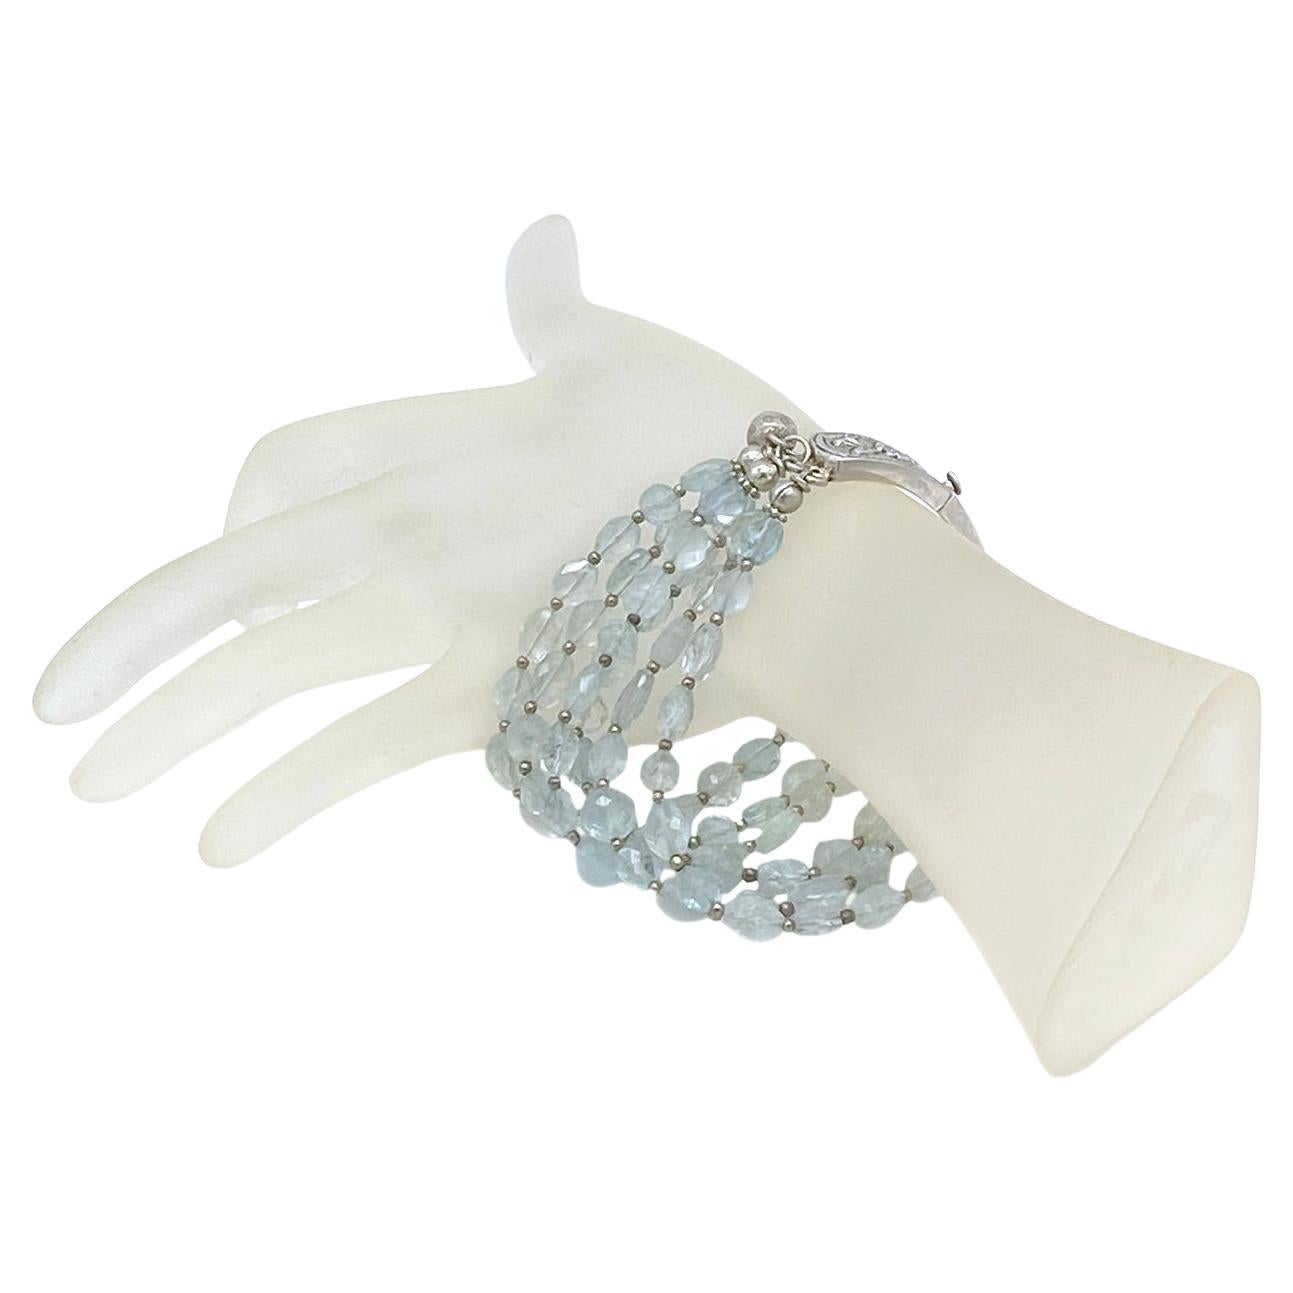 We created this multi-strand bracelet with faceted translucent aquamarines and sterling spacers. It comes with a one-of-a-kind, hand made sterling silver curved band box clasp and is accented with two hill tribe fine silver bells.

Our vintage